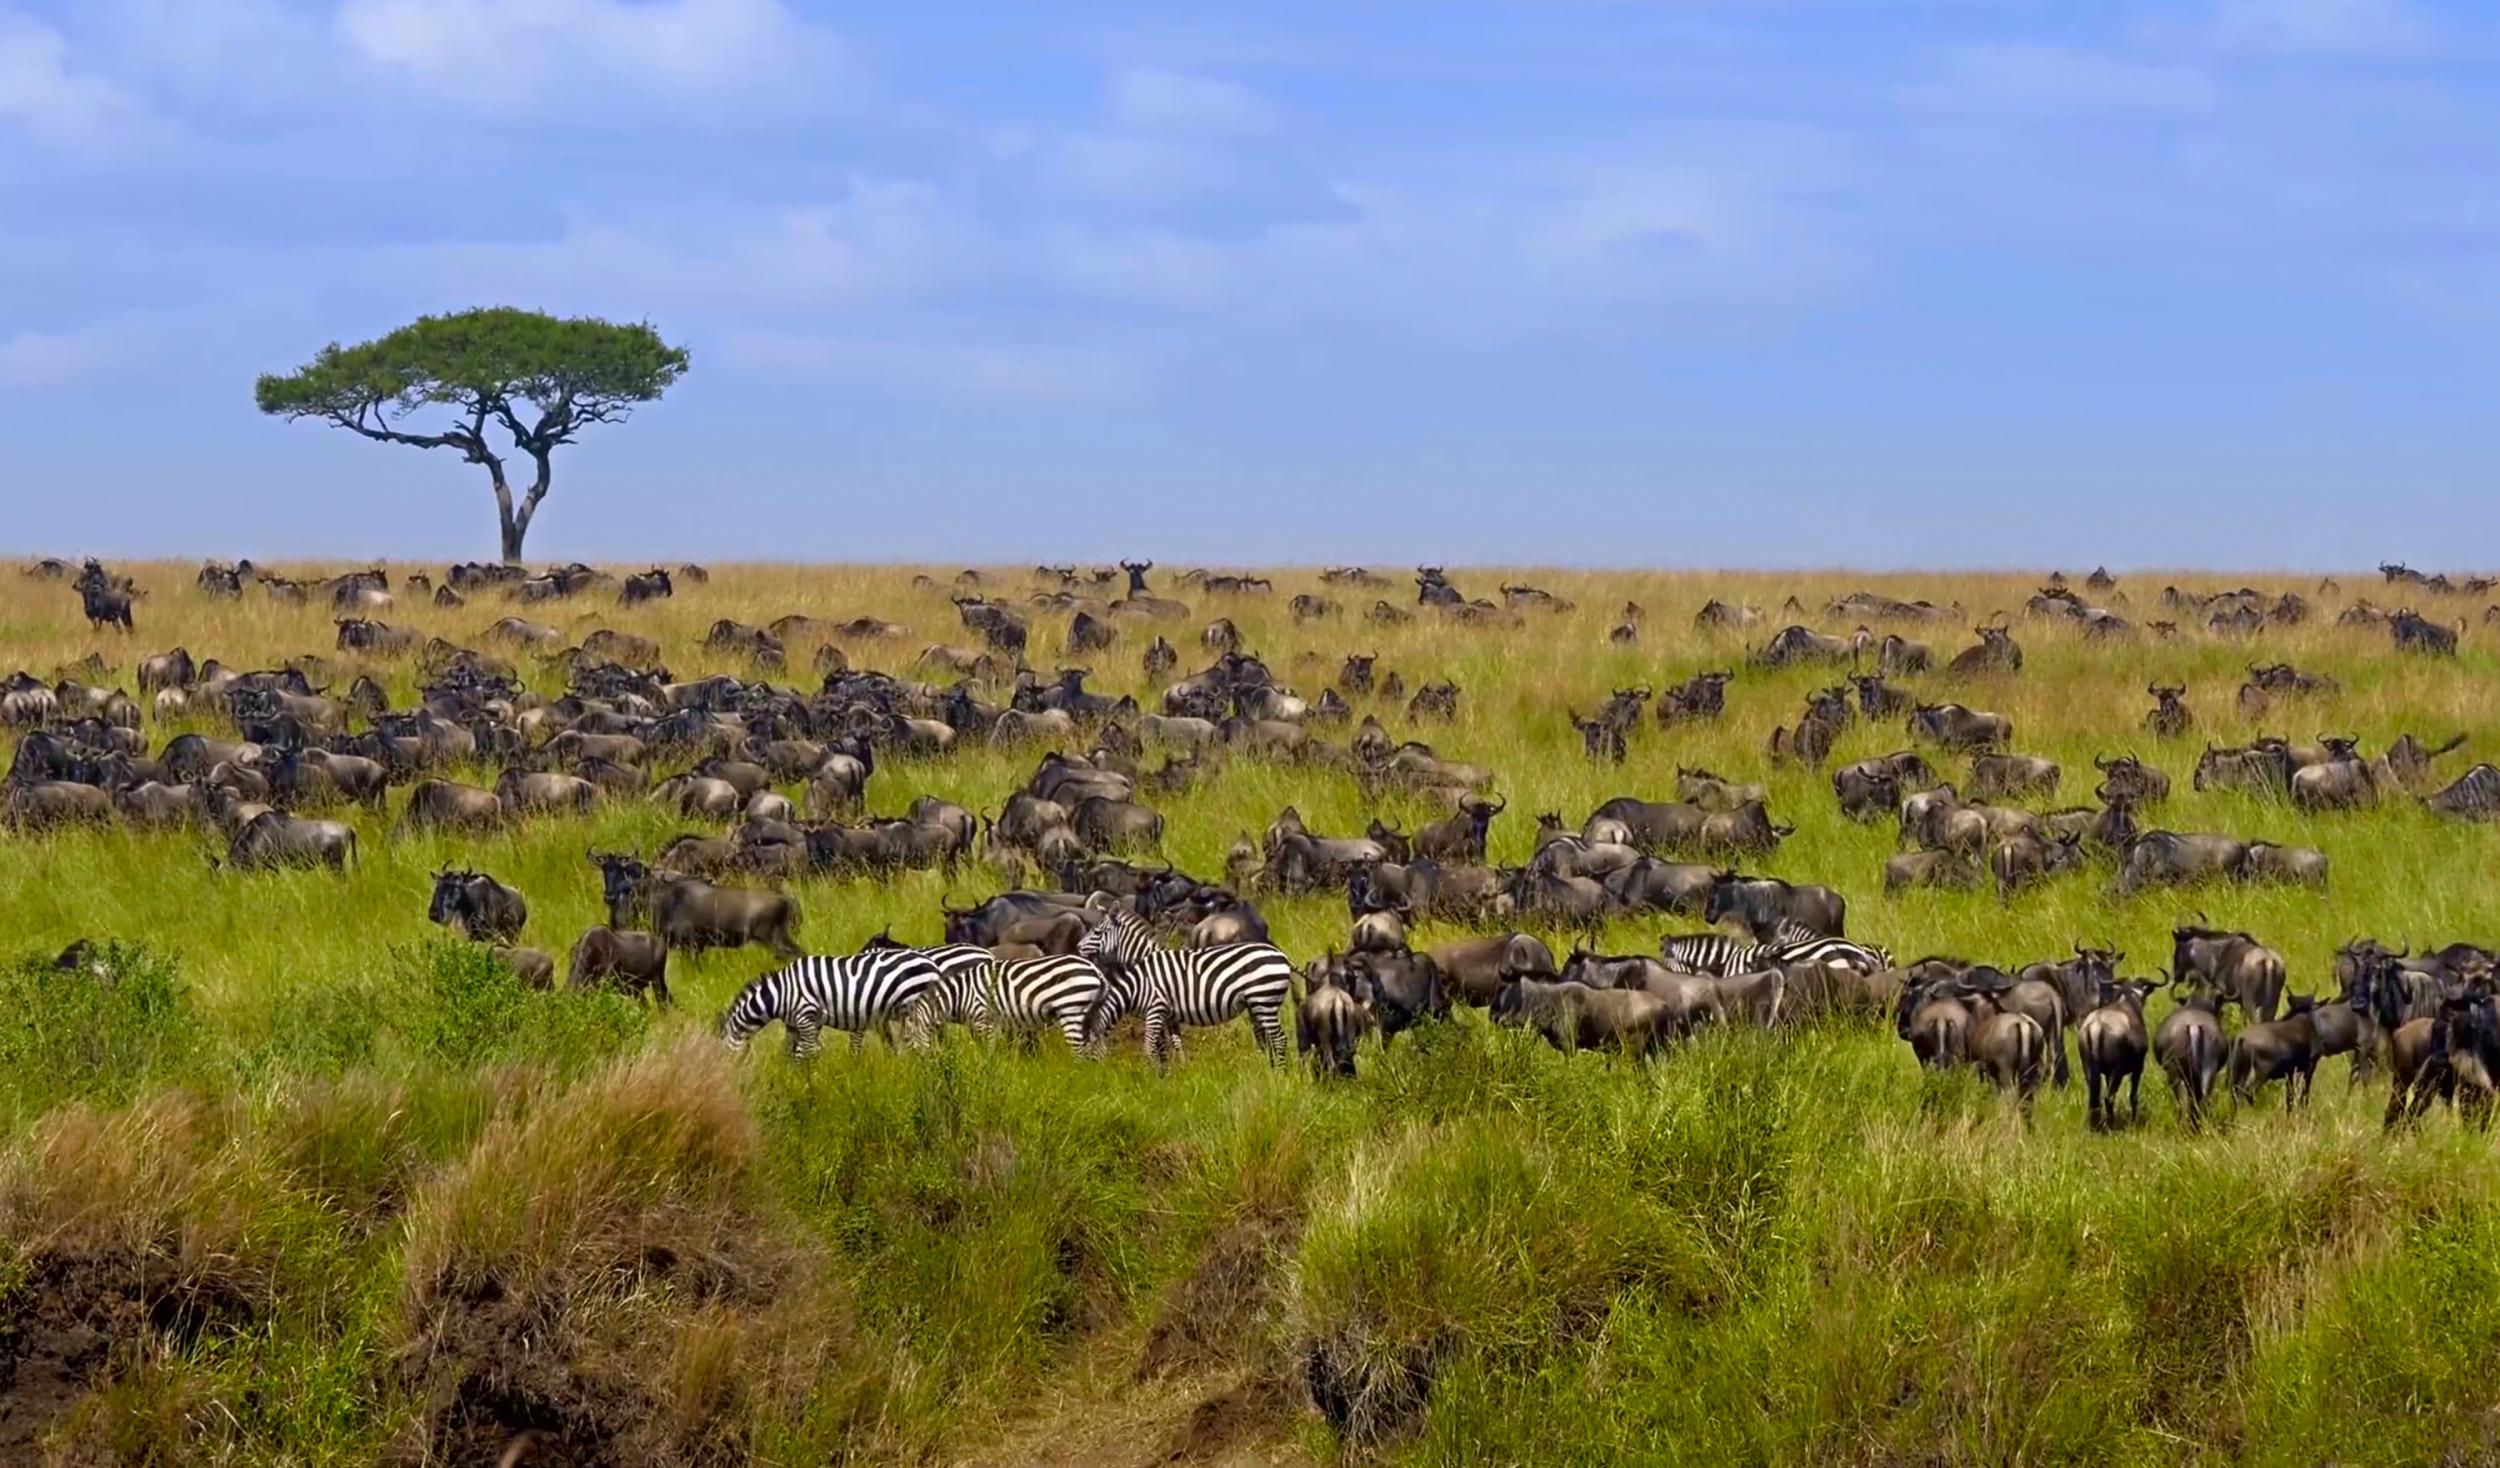 The great migration of wildebeest starts this month in Kenya